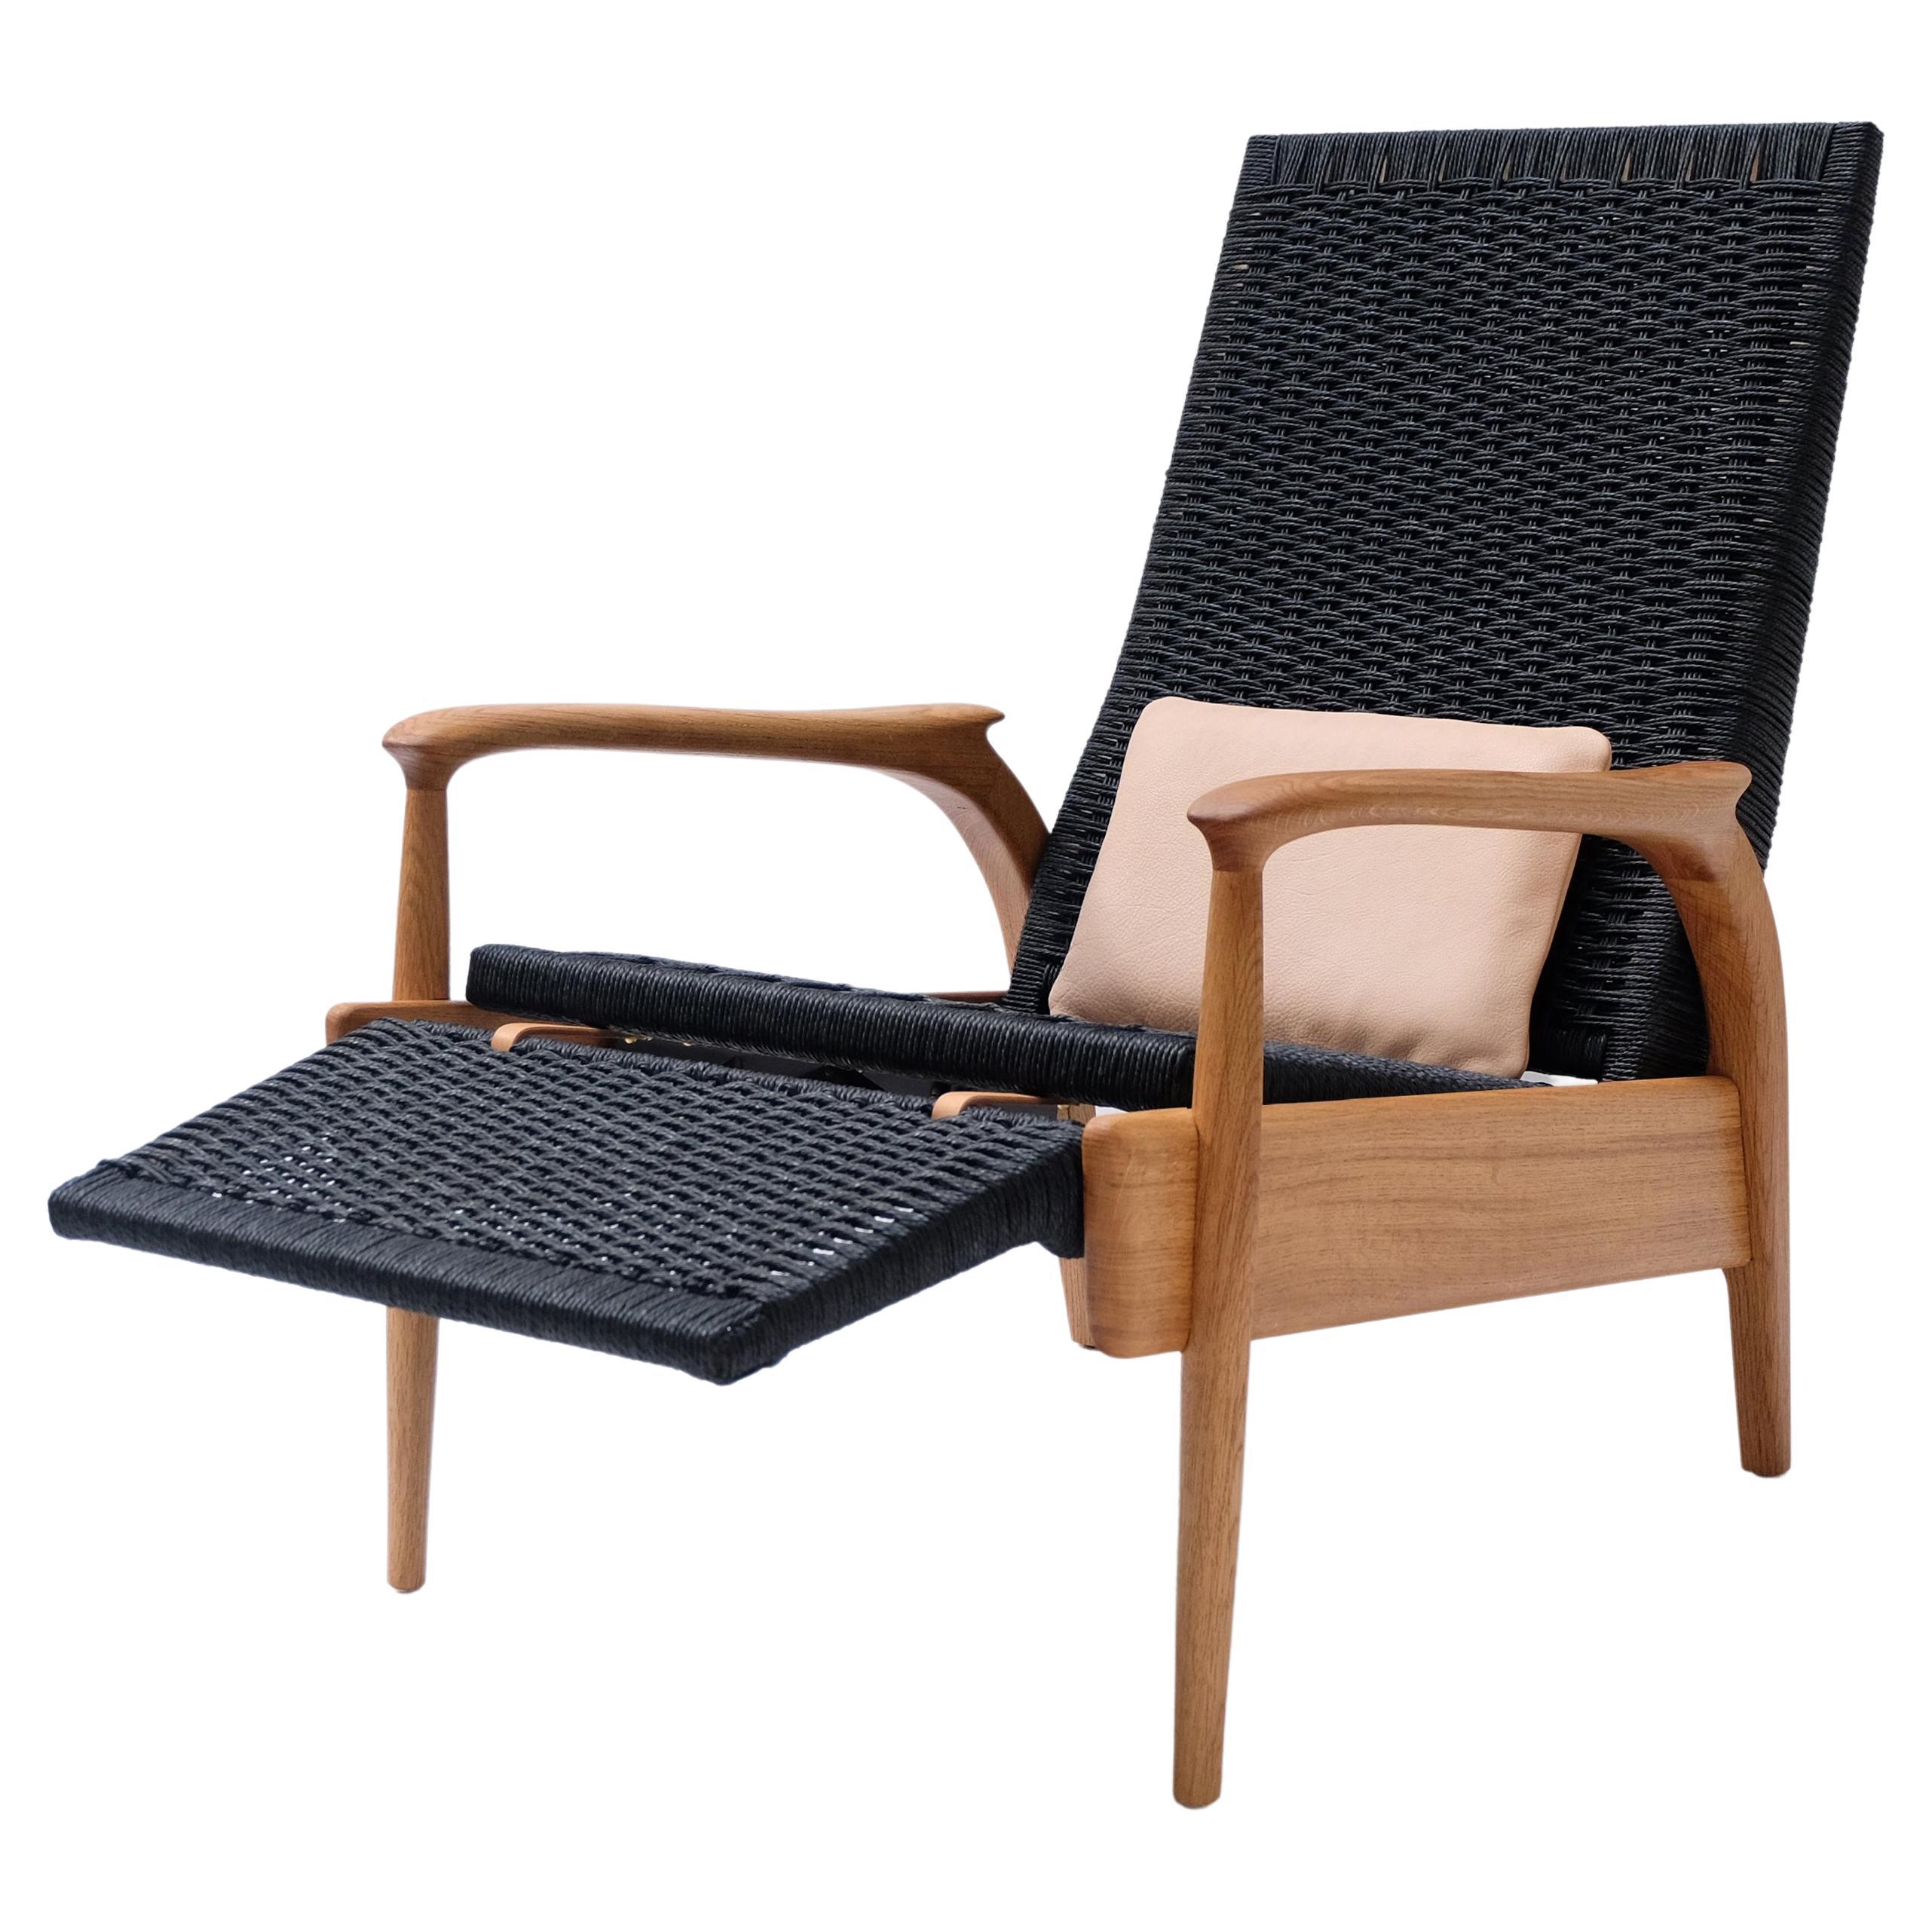 Custom-Made Lounge Chair in Solid Oak& Black Danish Cord with Leather Cushions For Sale